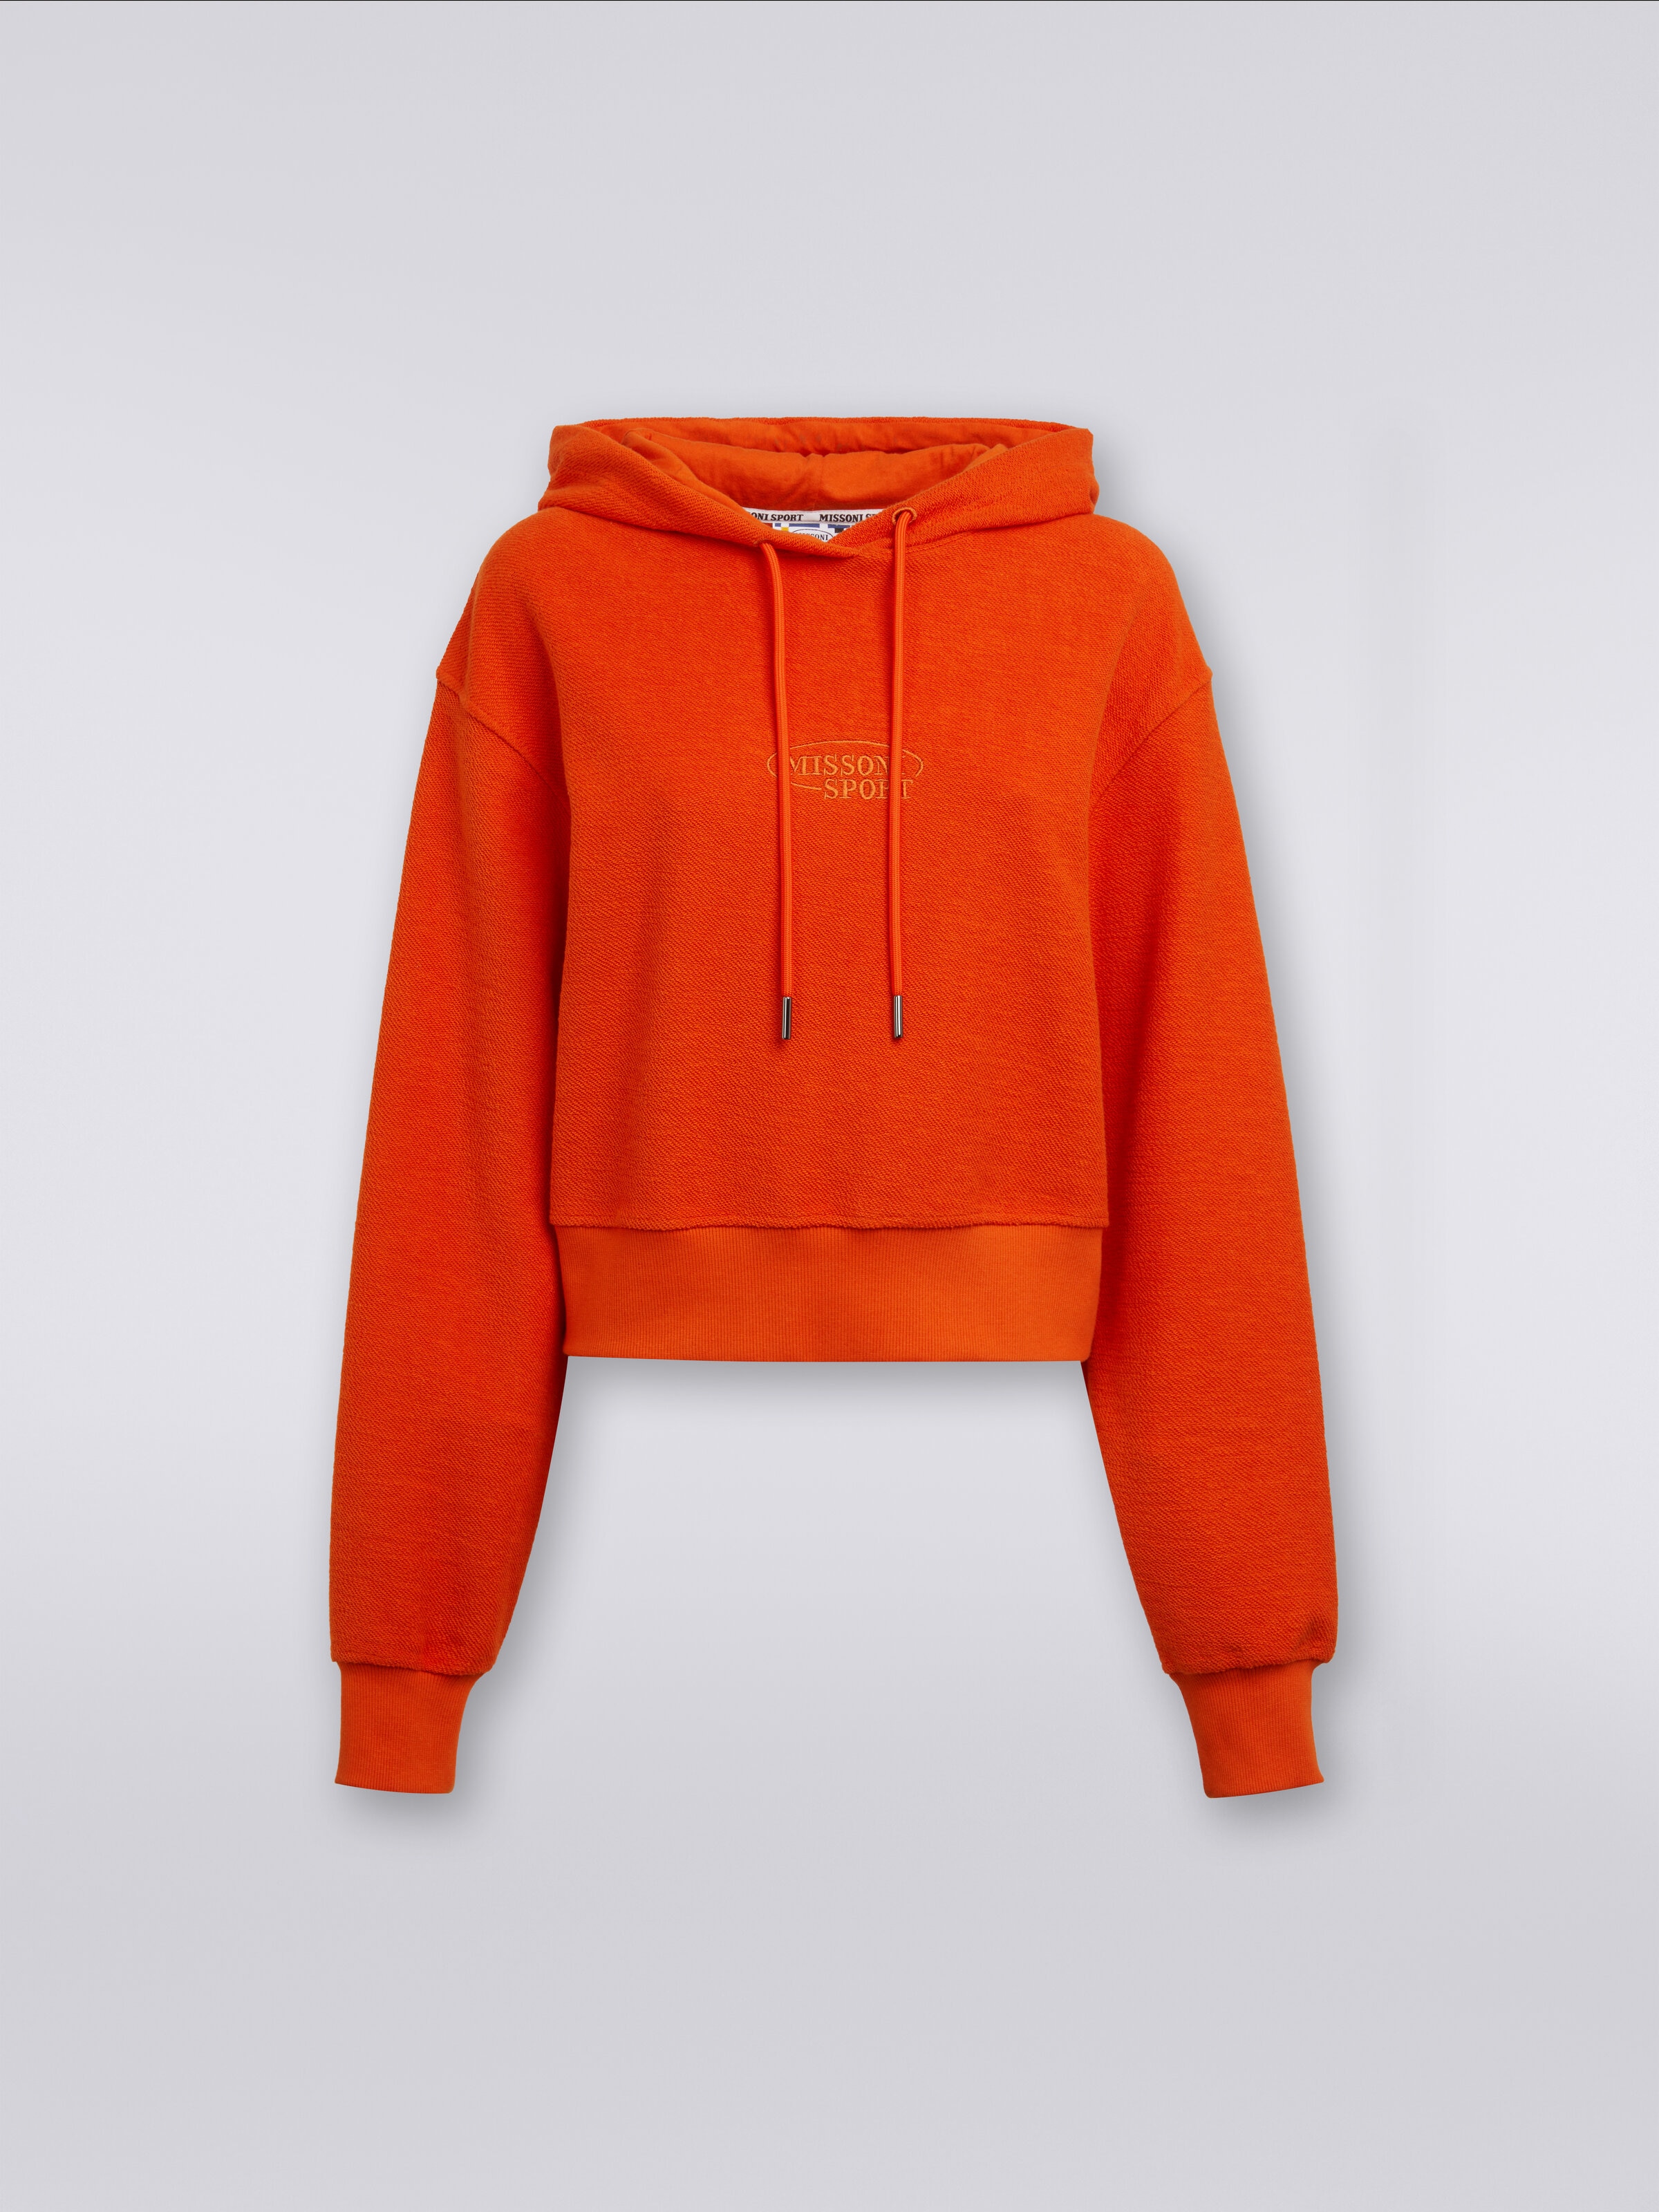 Brand New With Tags Mens Superdry Sport Orange Algeria